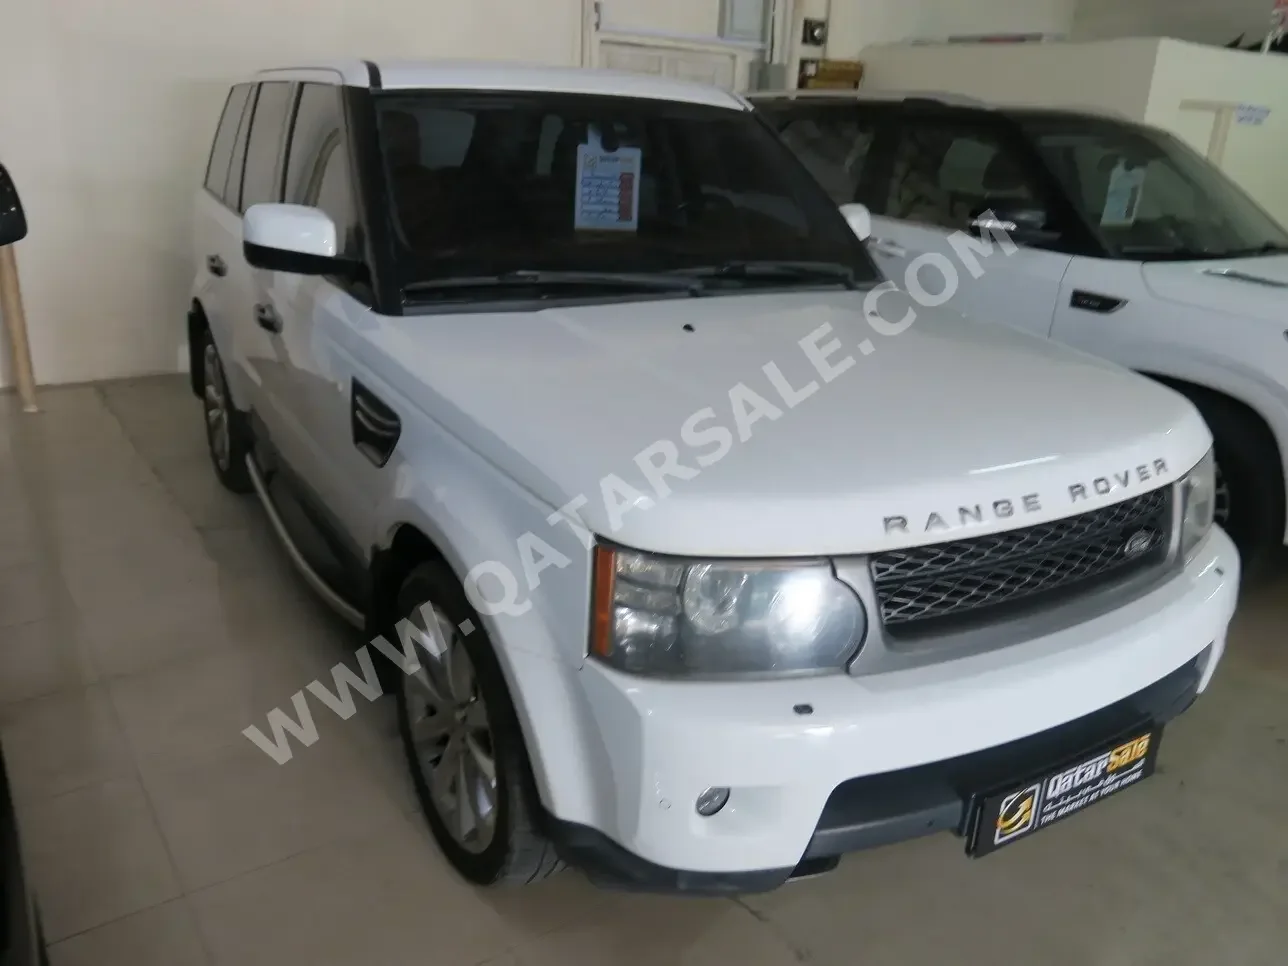 Land Rover  Range Rover  HSE  2011  Automatic  138,000 Km  8 Cylinder  Four Wheel Drive (4WD)  SUV  White